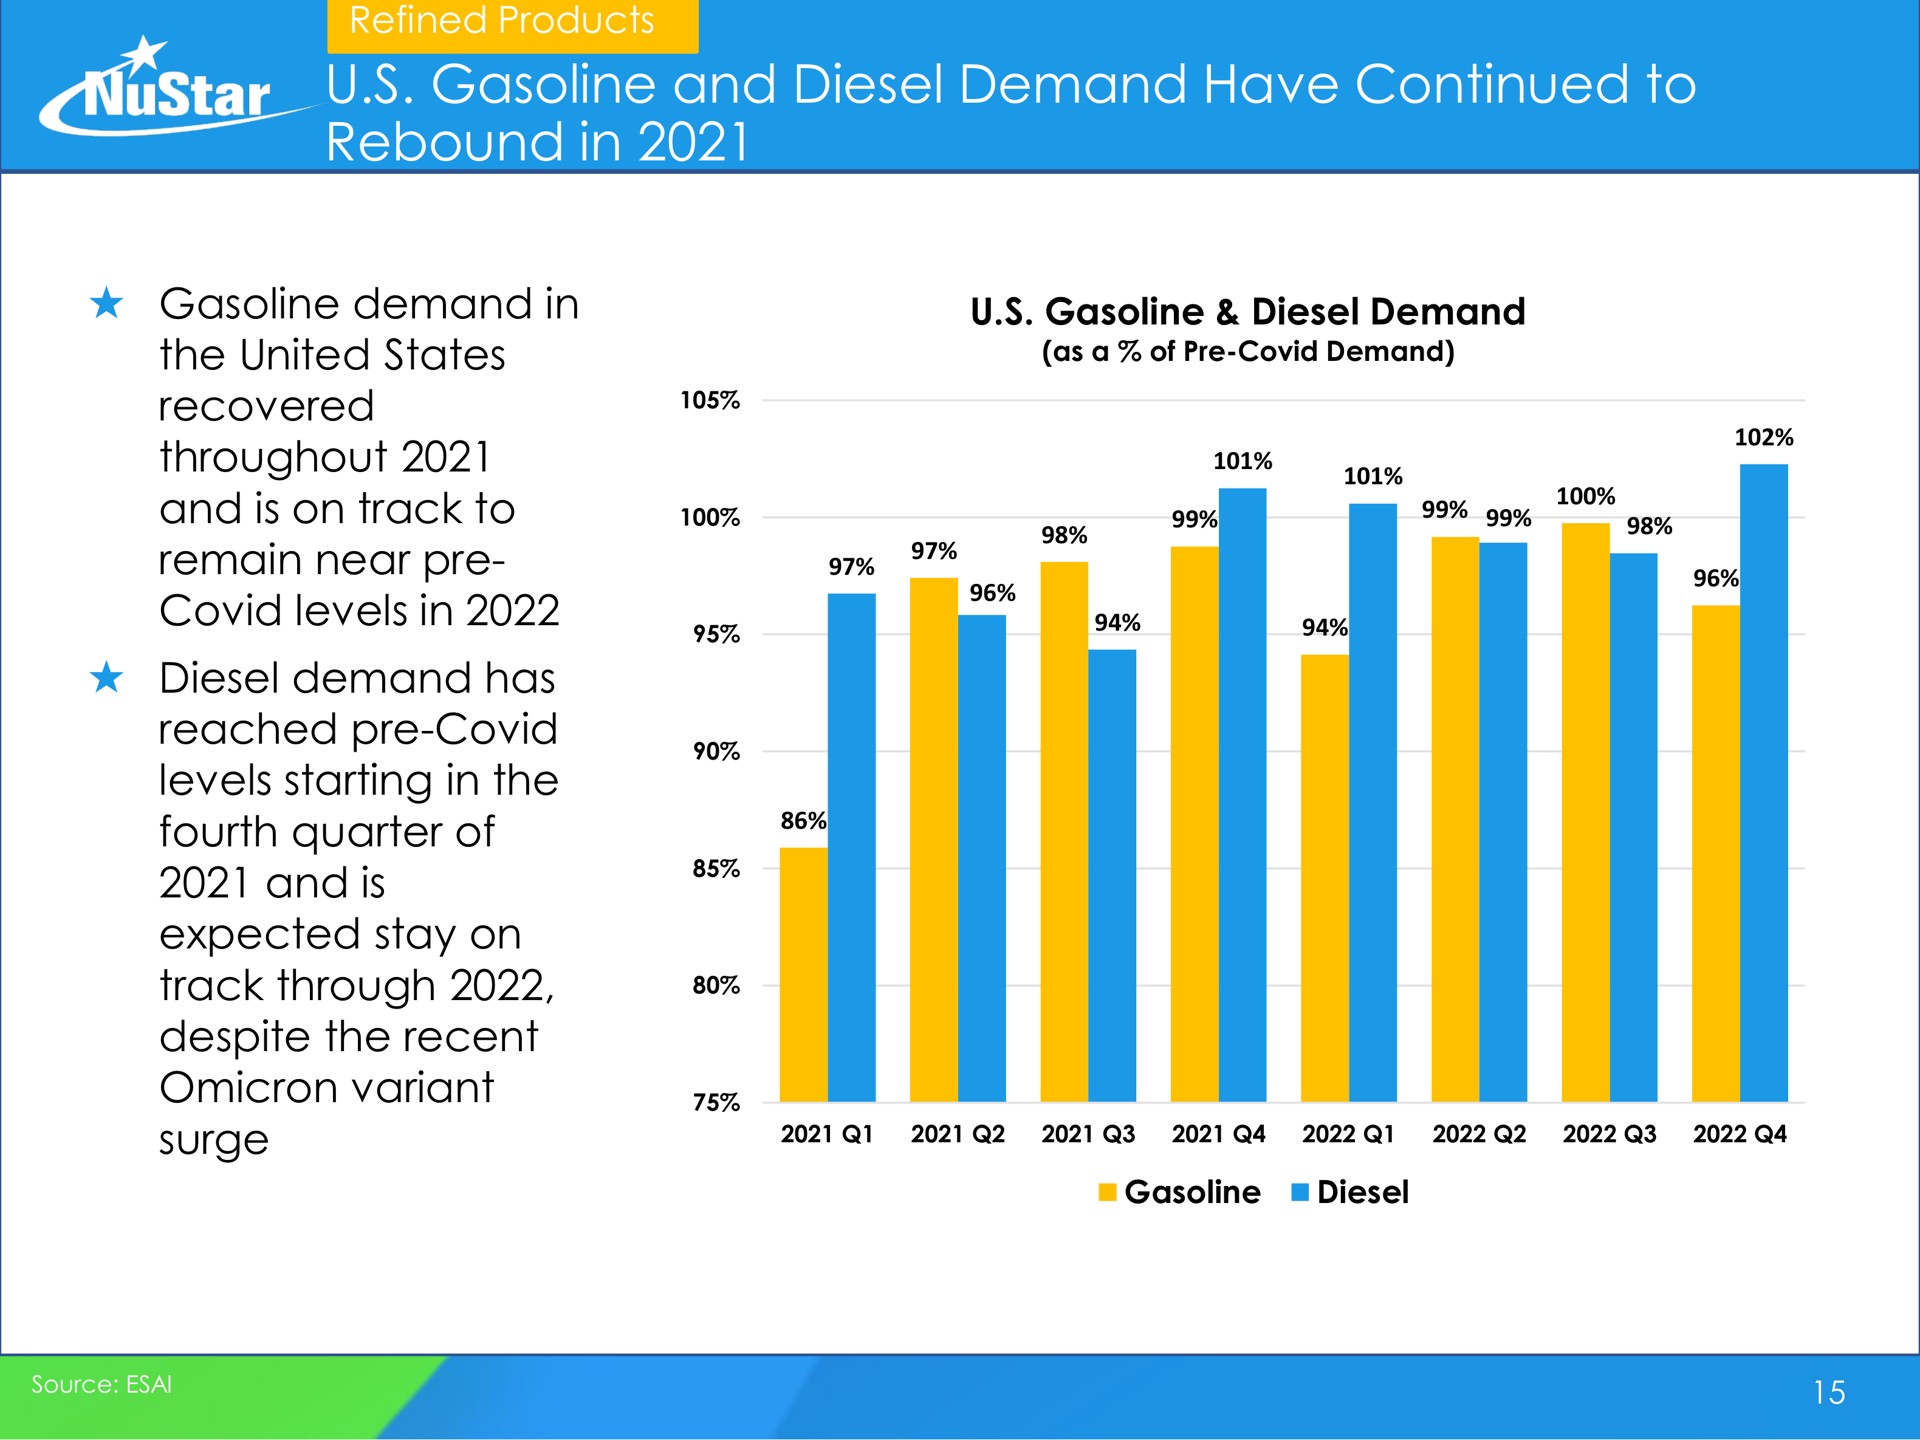 gasoline and diesel demand have continued to rebound in pat star throughout remain near covid levels fourth quarter of is sory a at am a | NuStar Energy